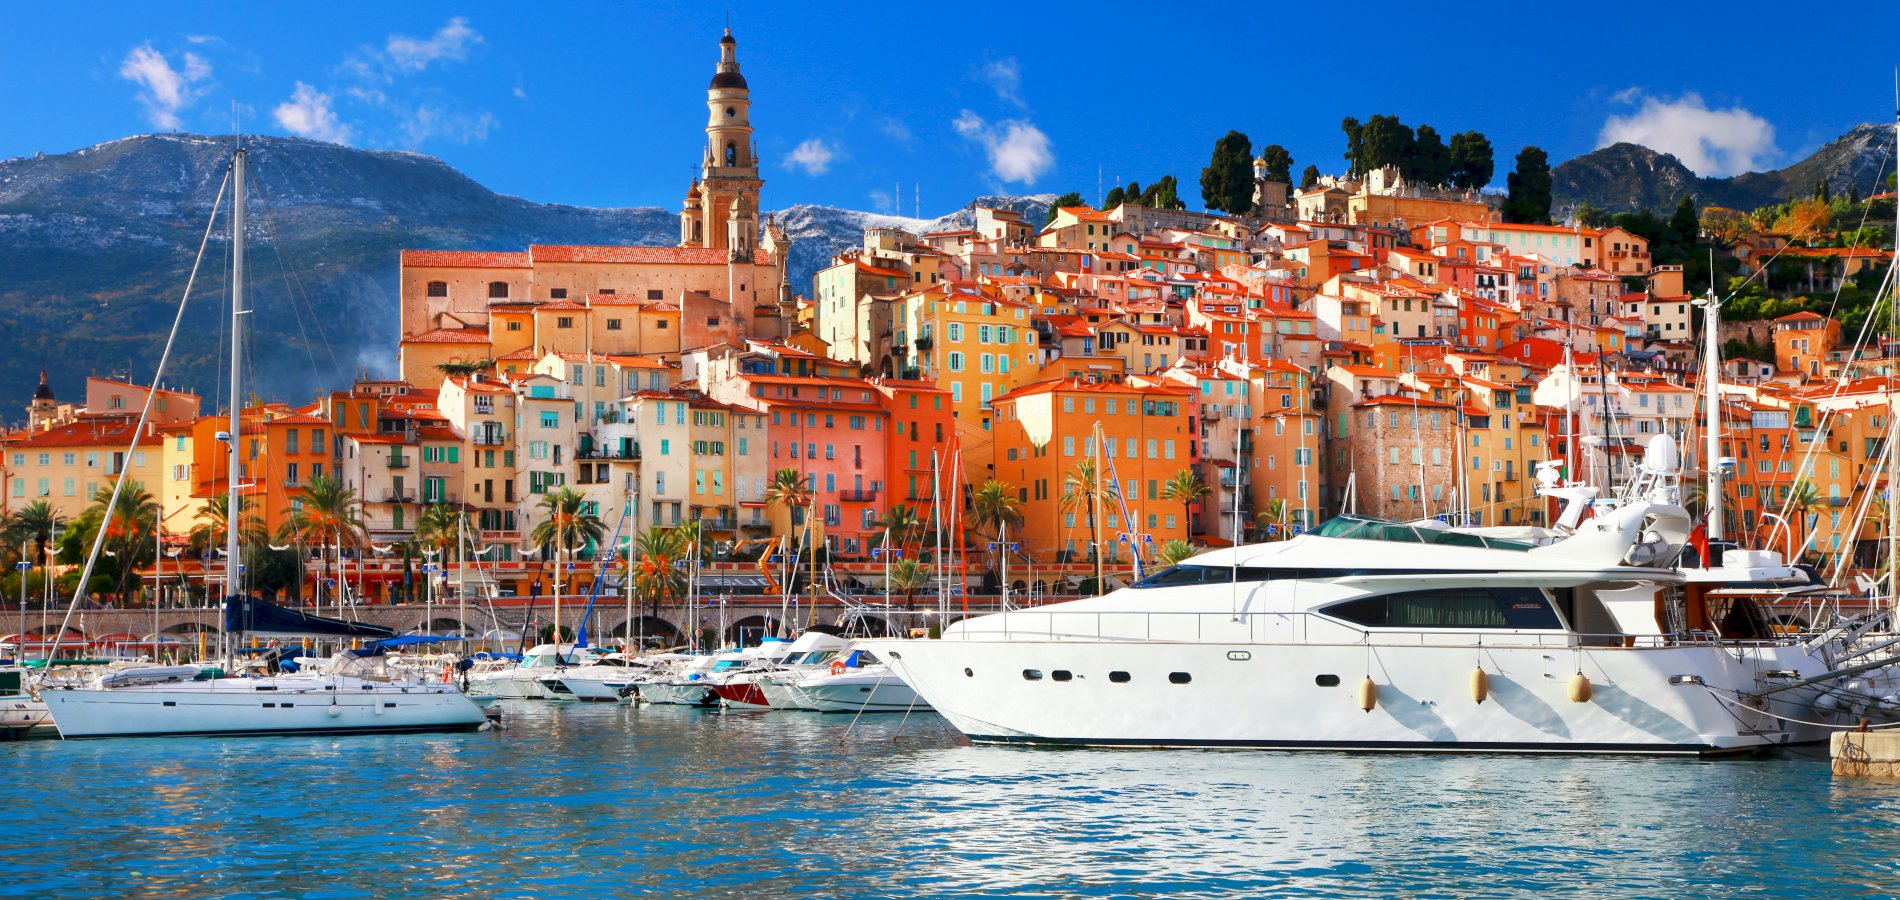 Ophorus Tours - From Nice Port to Cannes, Antibes & Juan Les Pins shore excursion private